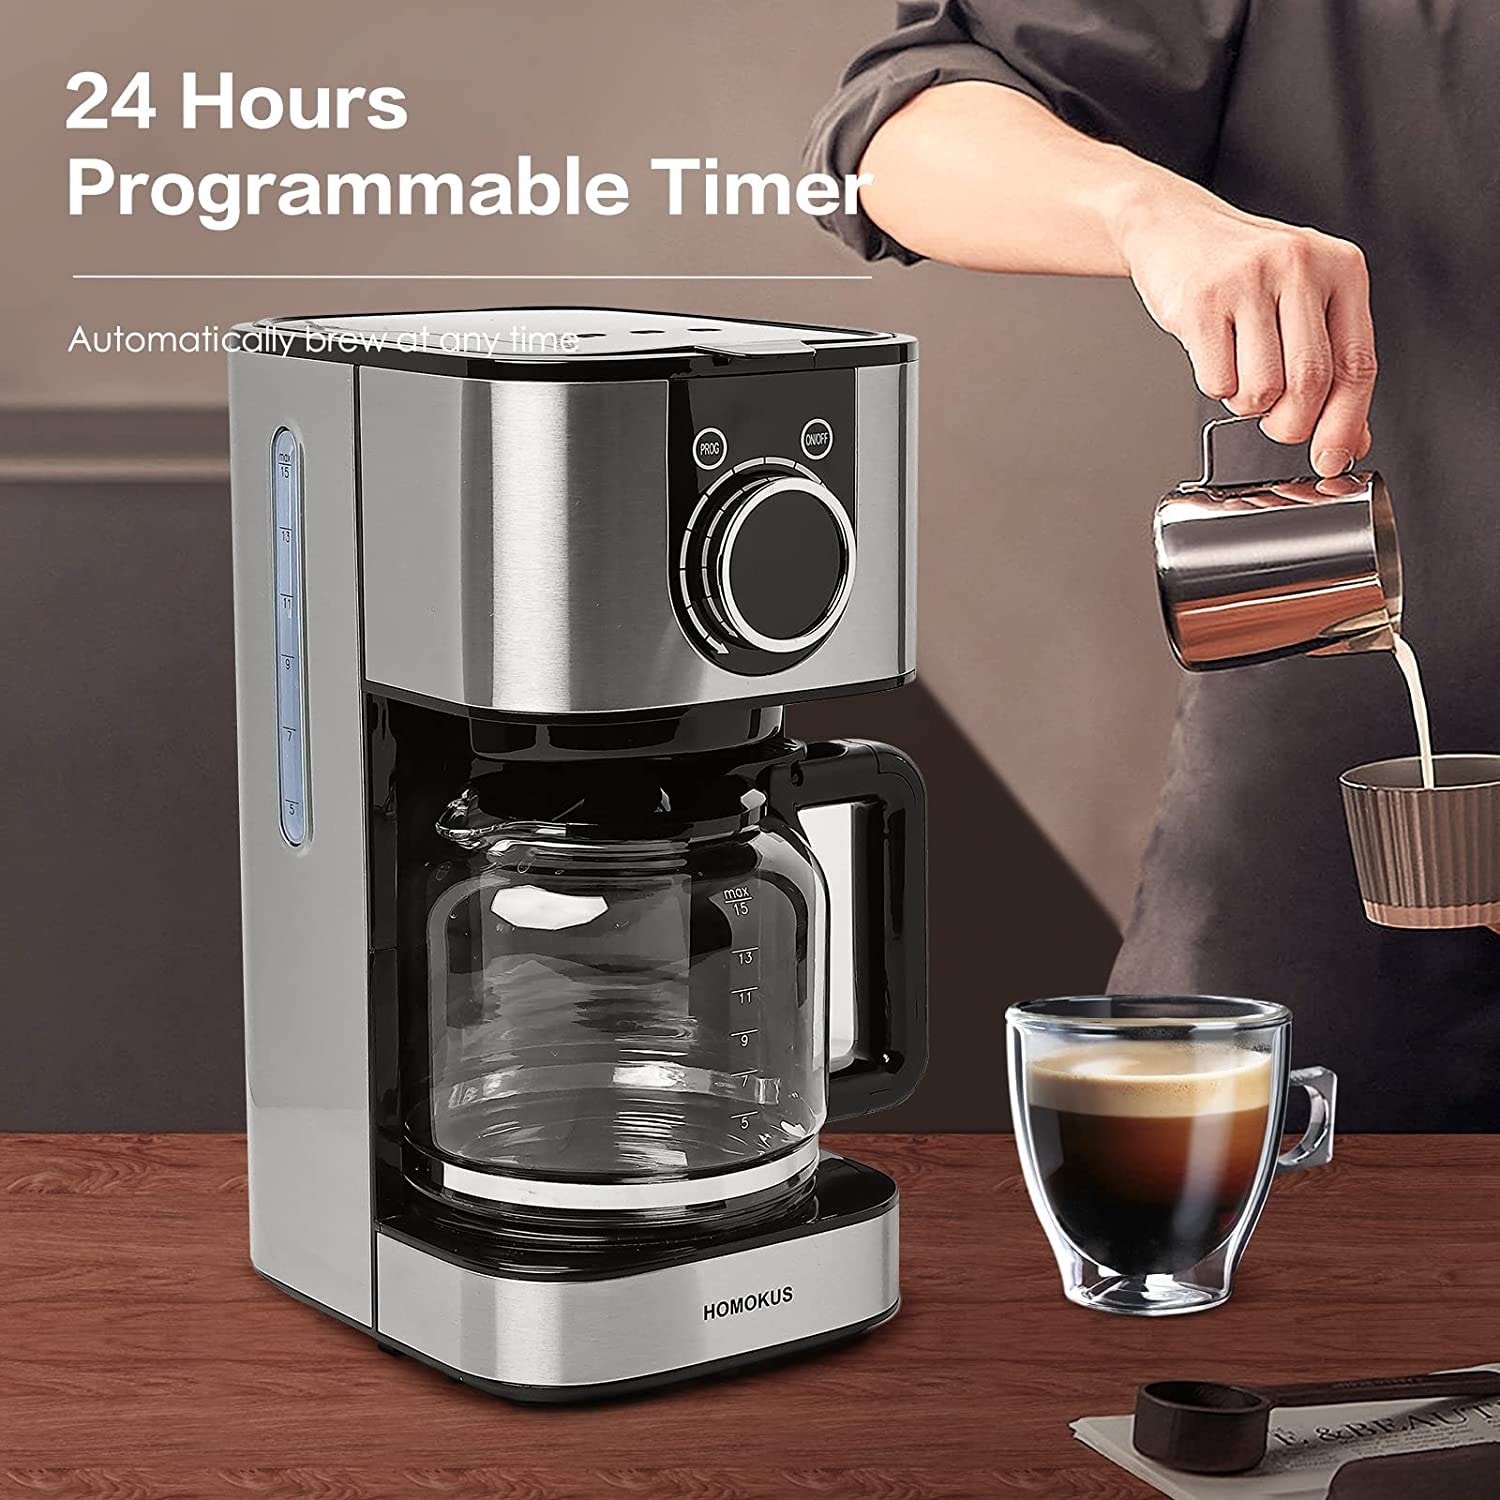 https://ak1.ostkcdn.com/images/products/is/images/direct/9013a712aaefb2ee3442c08e1e9f3a1a39748959/10-Cup-Coffee-Maker---Programmable-Drip-Coffee-Maker--Stainless-Steel-Drip-Coffee-Machine-with-Timer.jpg